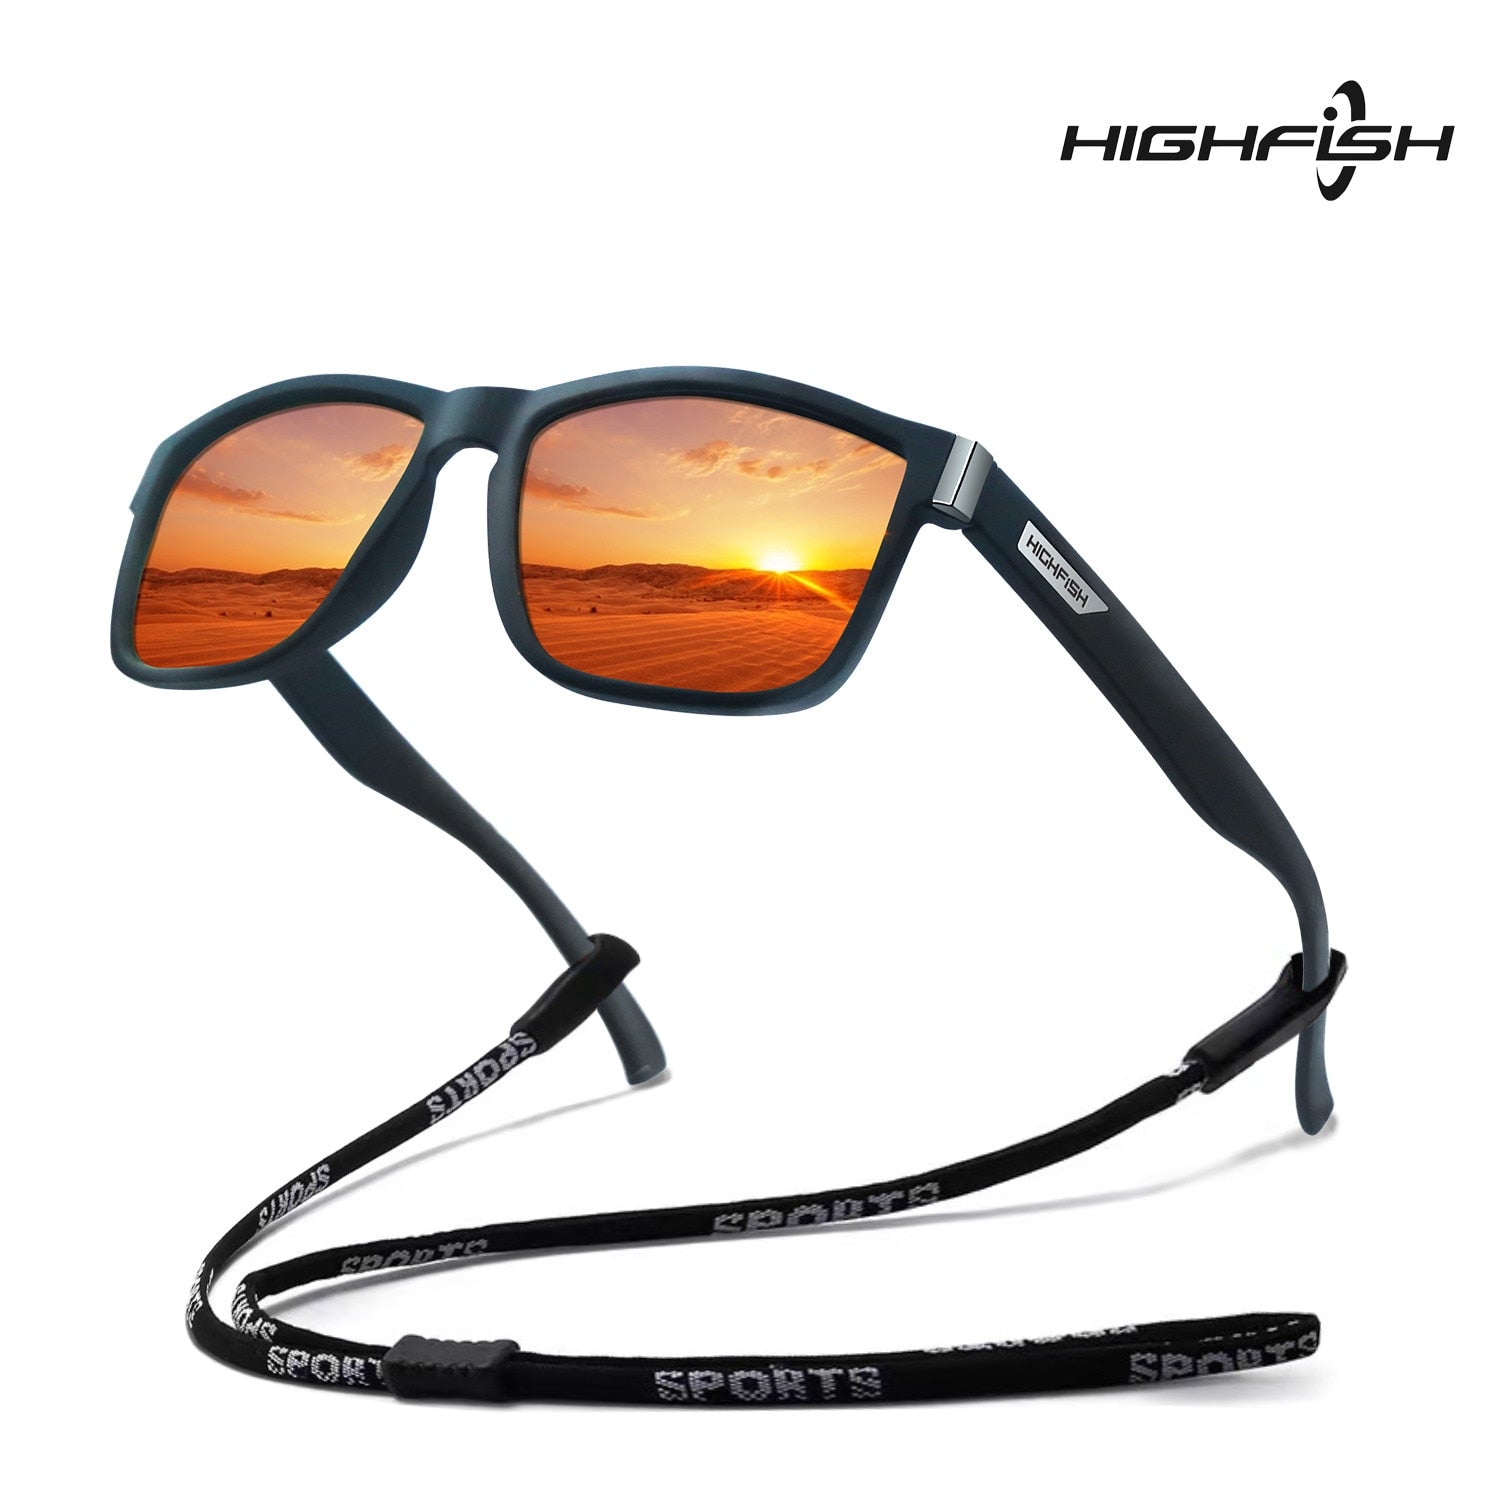 Polarized Fishing Polarized Fishing Sunglasses For Men Classic UV400 Eyewear  For Road Driving, Hiking, And Fishing 230818 From Diao05, $19.19